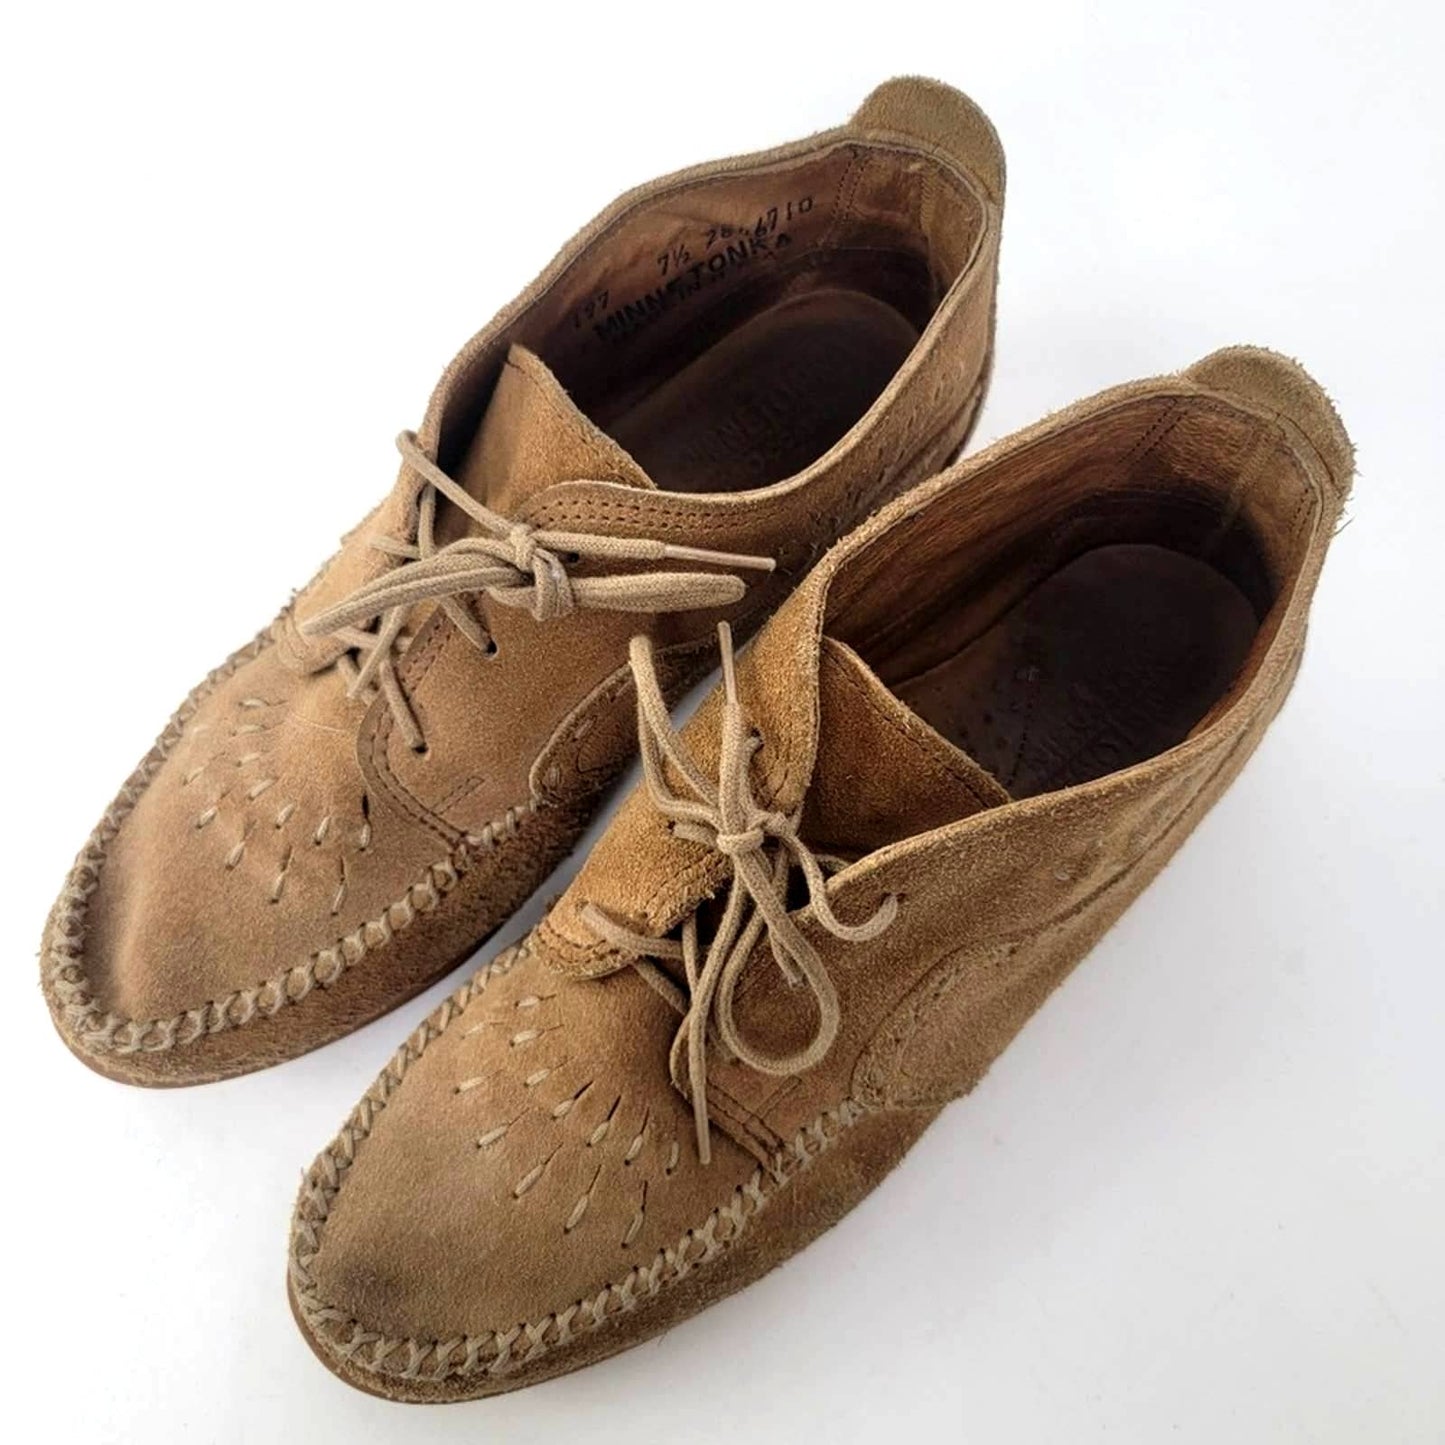 Minnetonka Brown Suede Ankle Moccassin Booties - 7.5